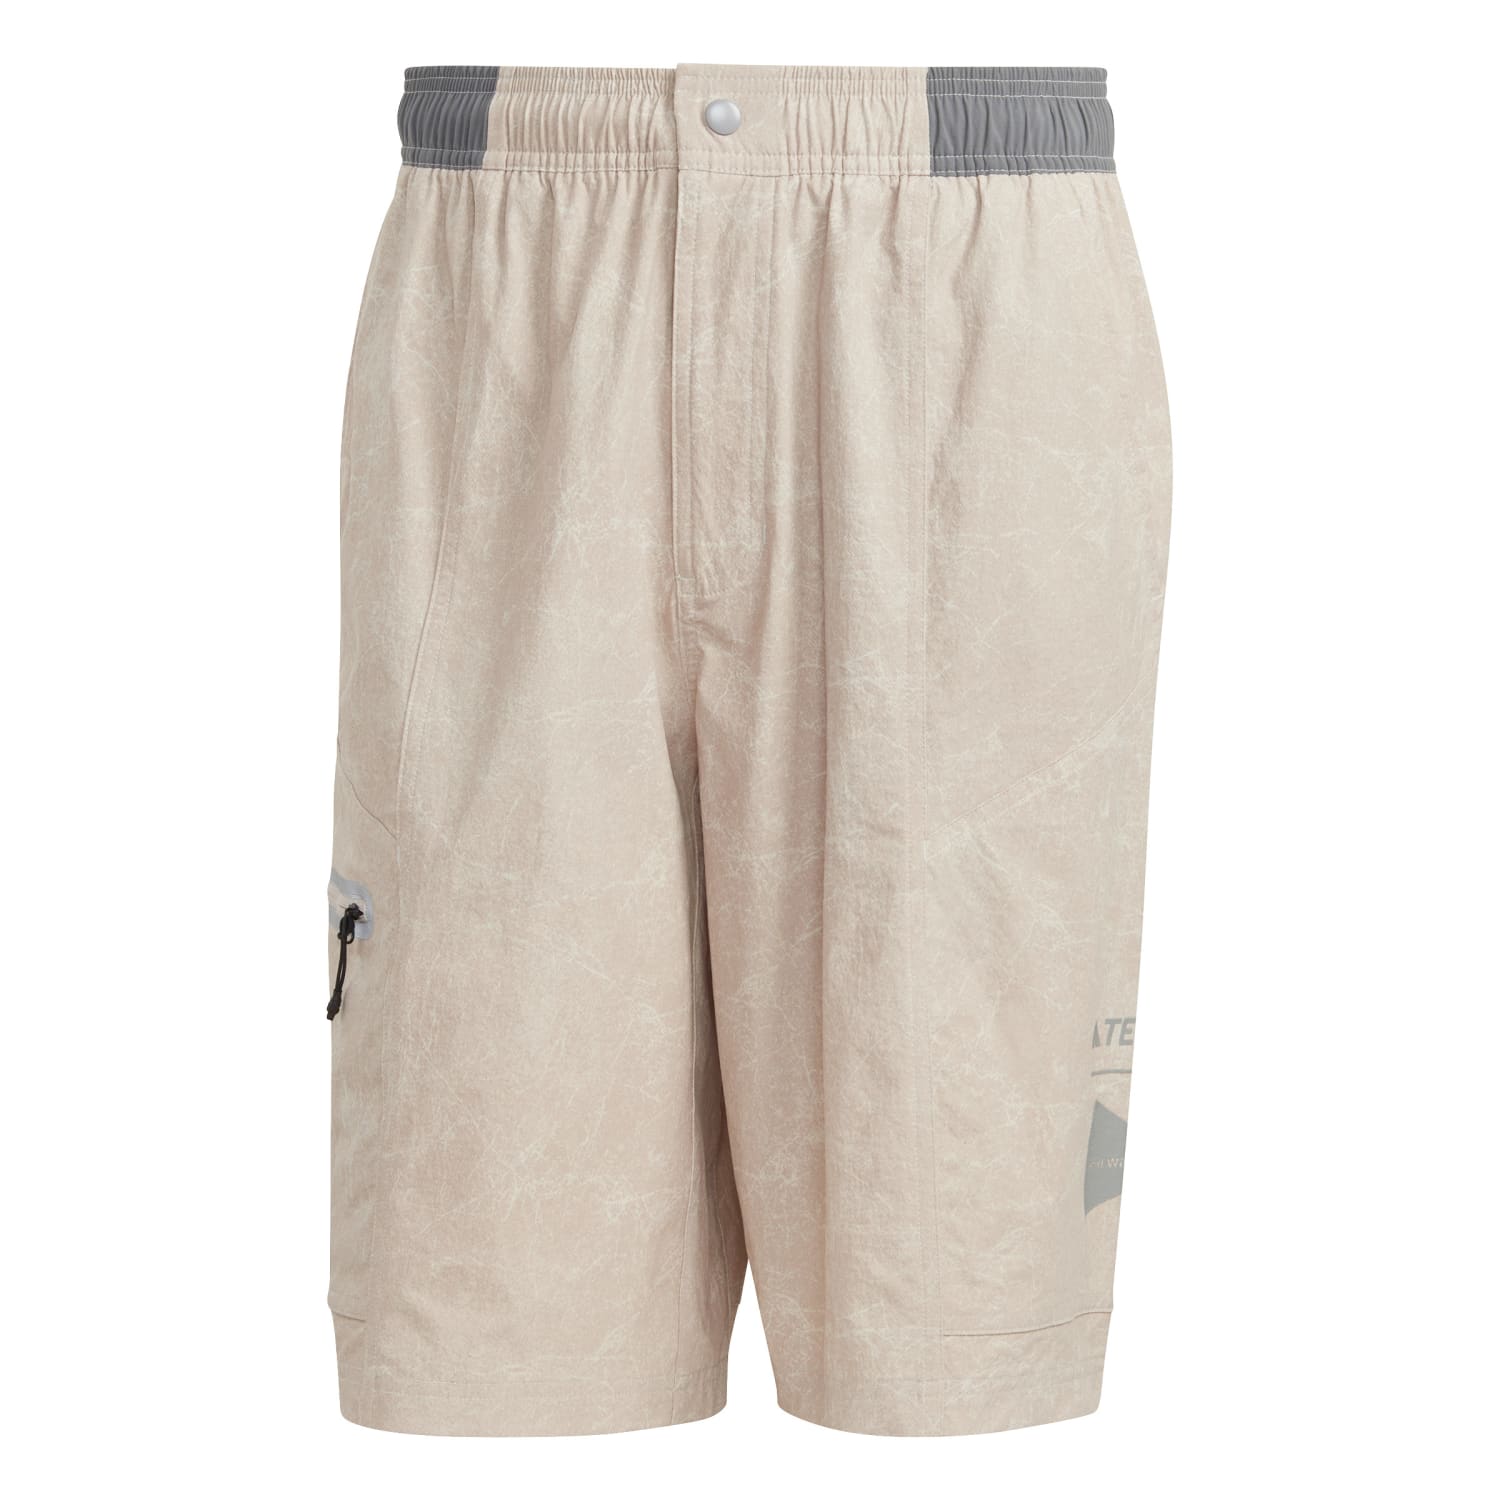 Adidas Outdoor Men AWD Shorts Taupe HR7135 - SHORTS - Canada